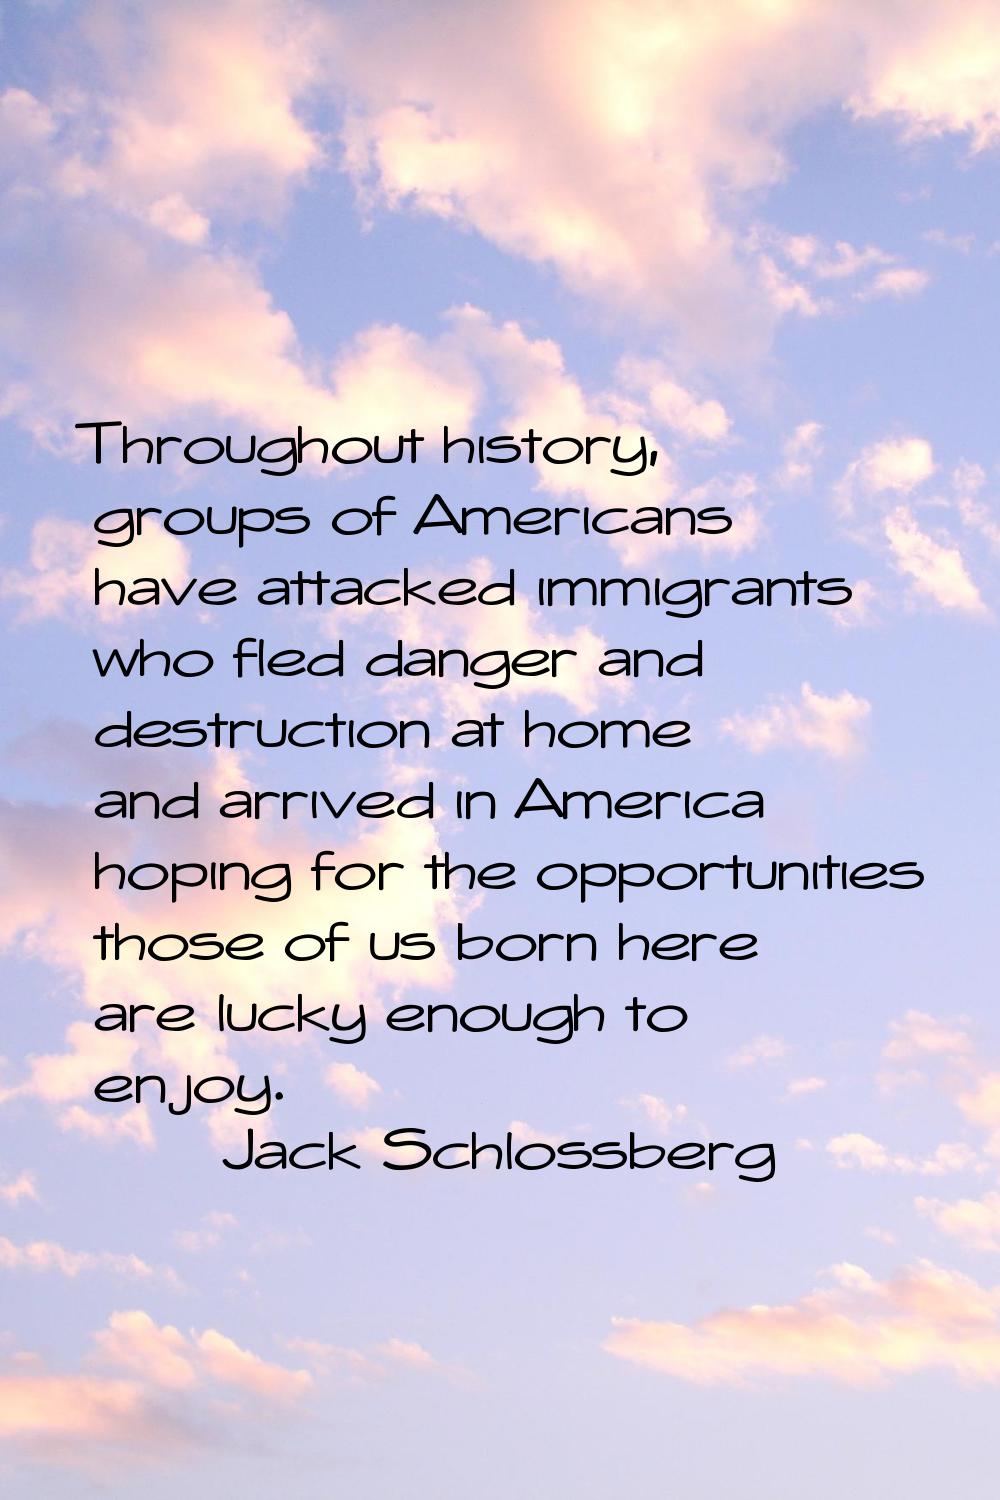 Throughout history, groups of Americans have attacked immigrants who fled danger and destruction at